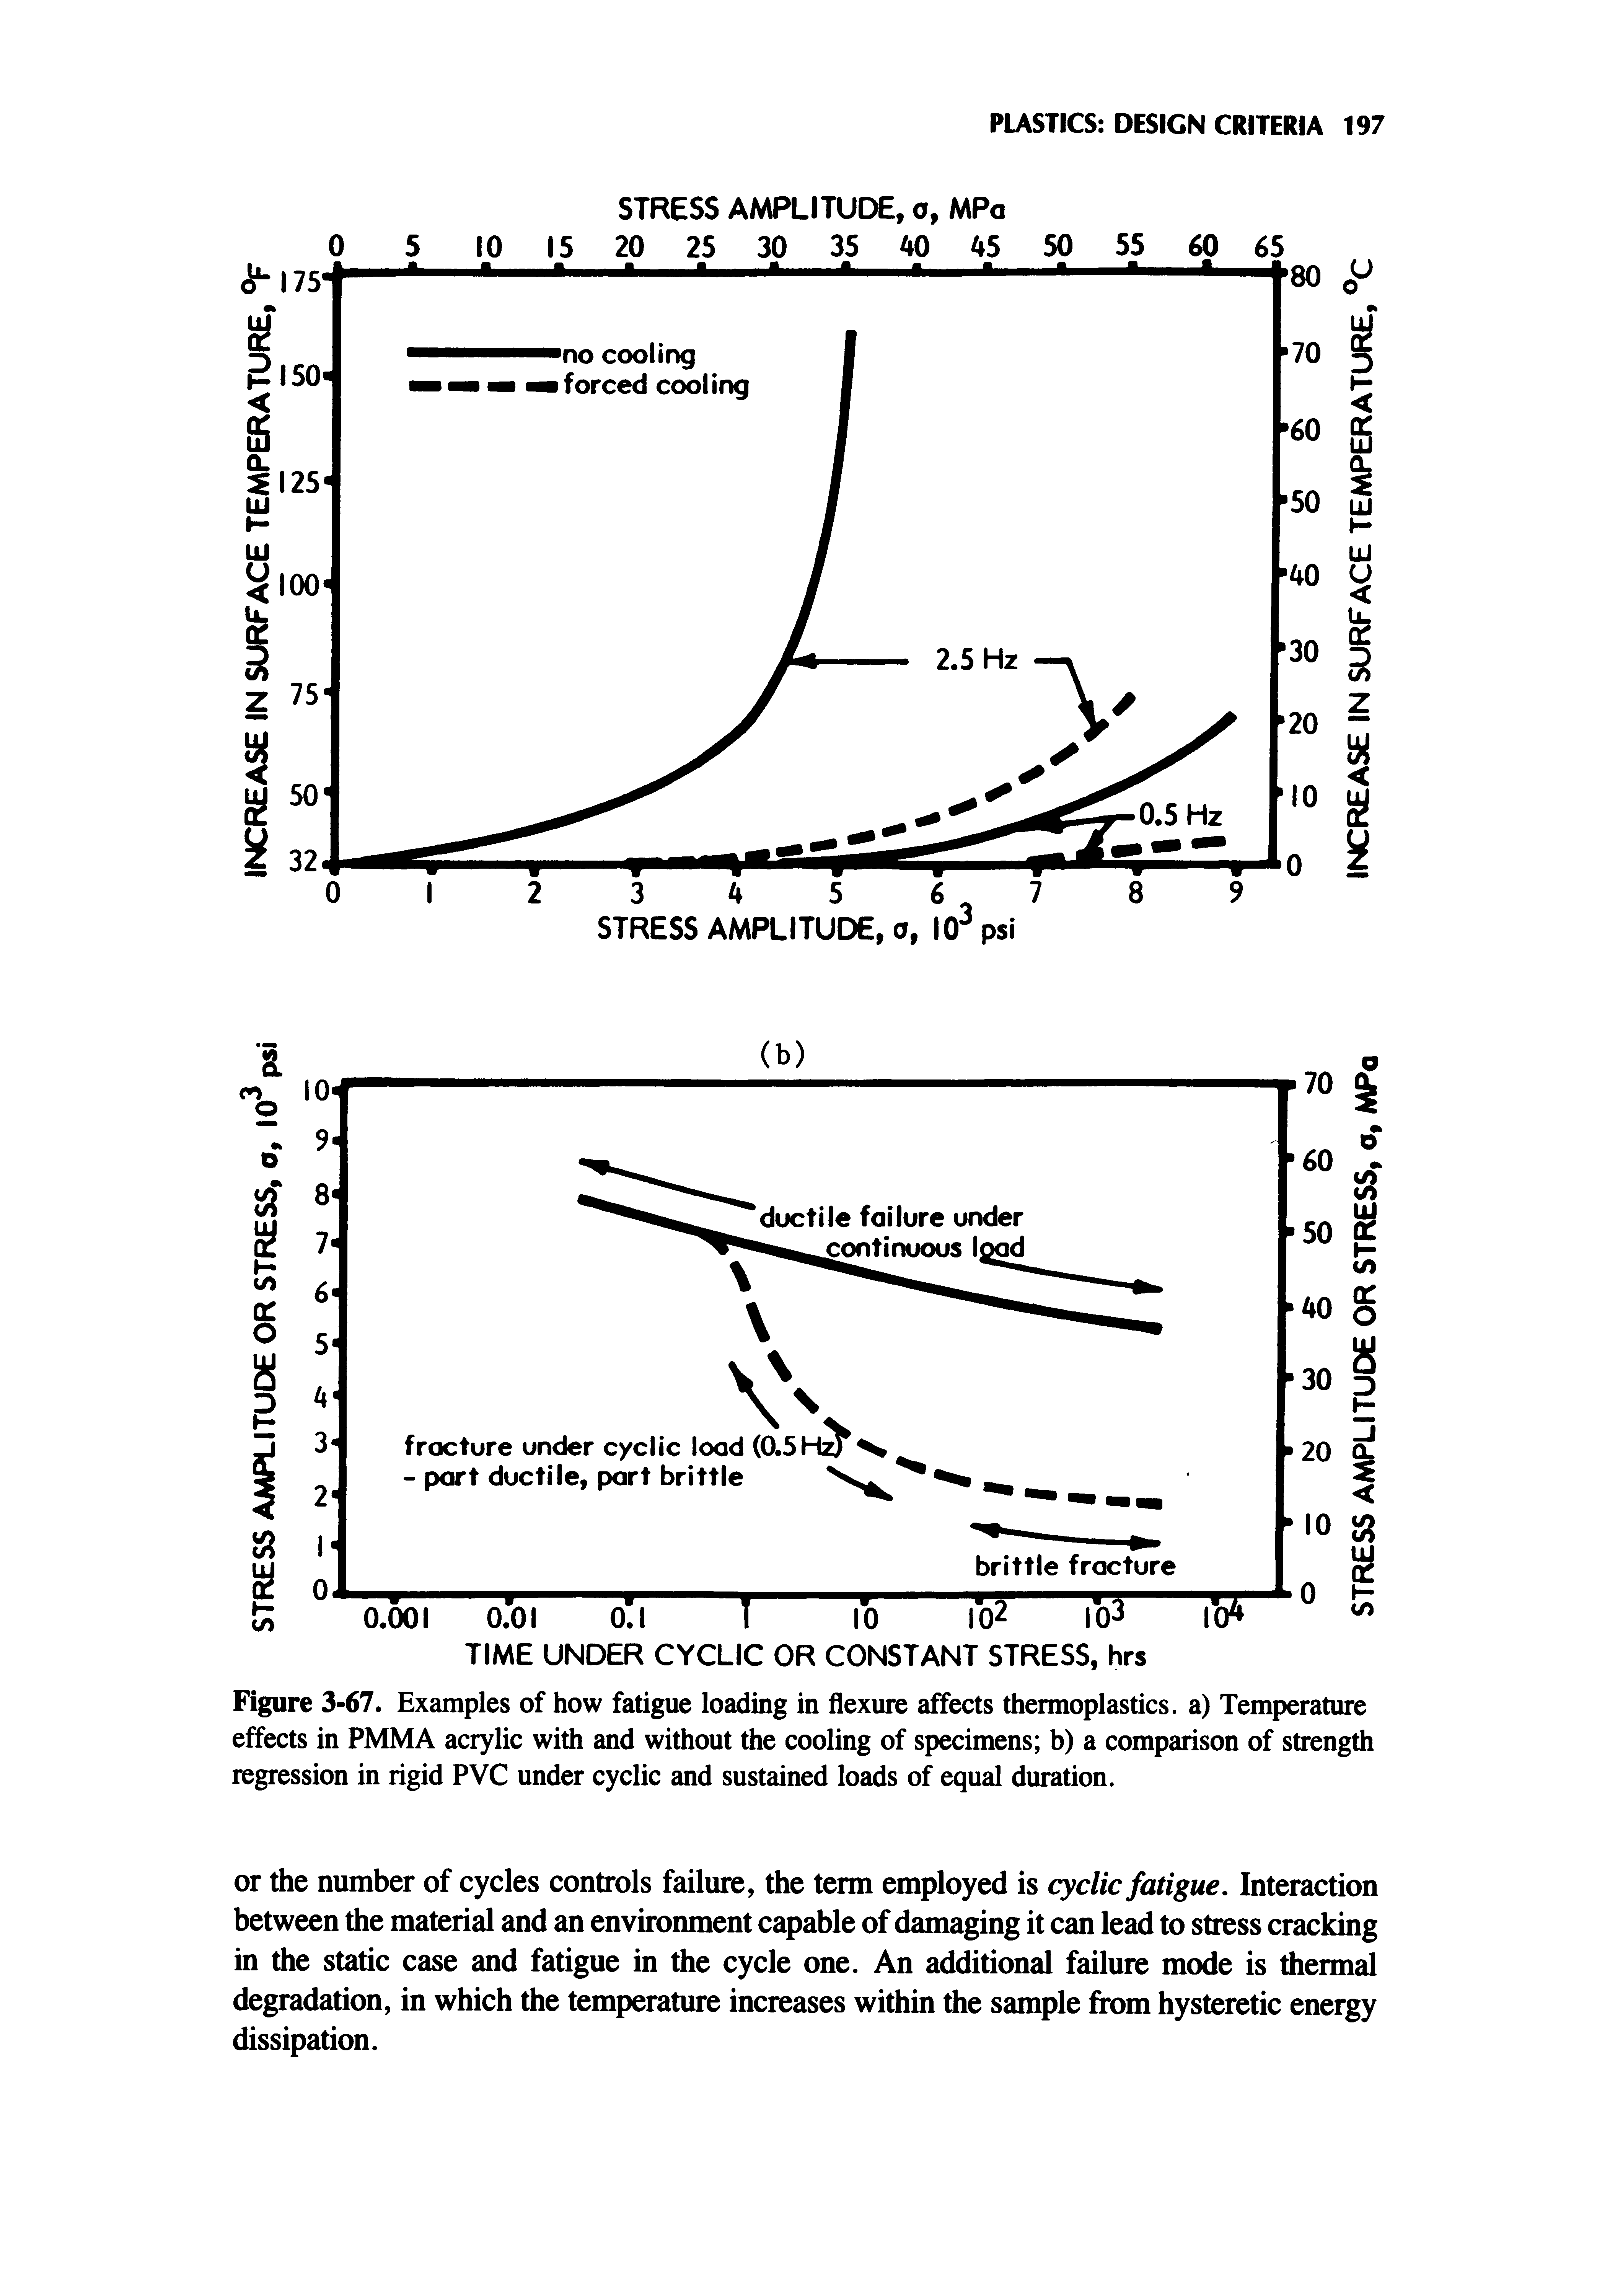 Figure 3-67. Examples of how fatigue loading in flexure affects thermoplastics, a) Temperature effects in PMMA acrylic with and without the cooling of specimens b) a comparison of strength regression in rigid PVC under cyclic and sustained loads of equal duration.